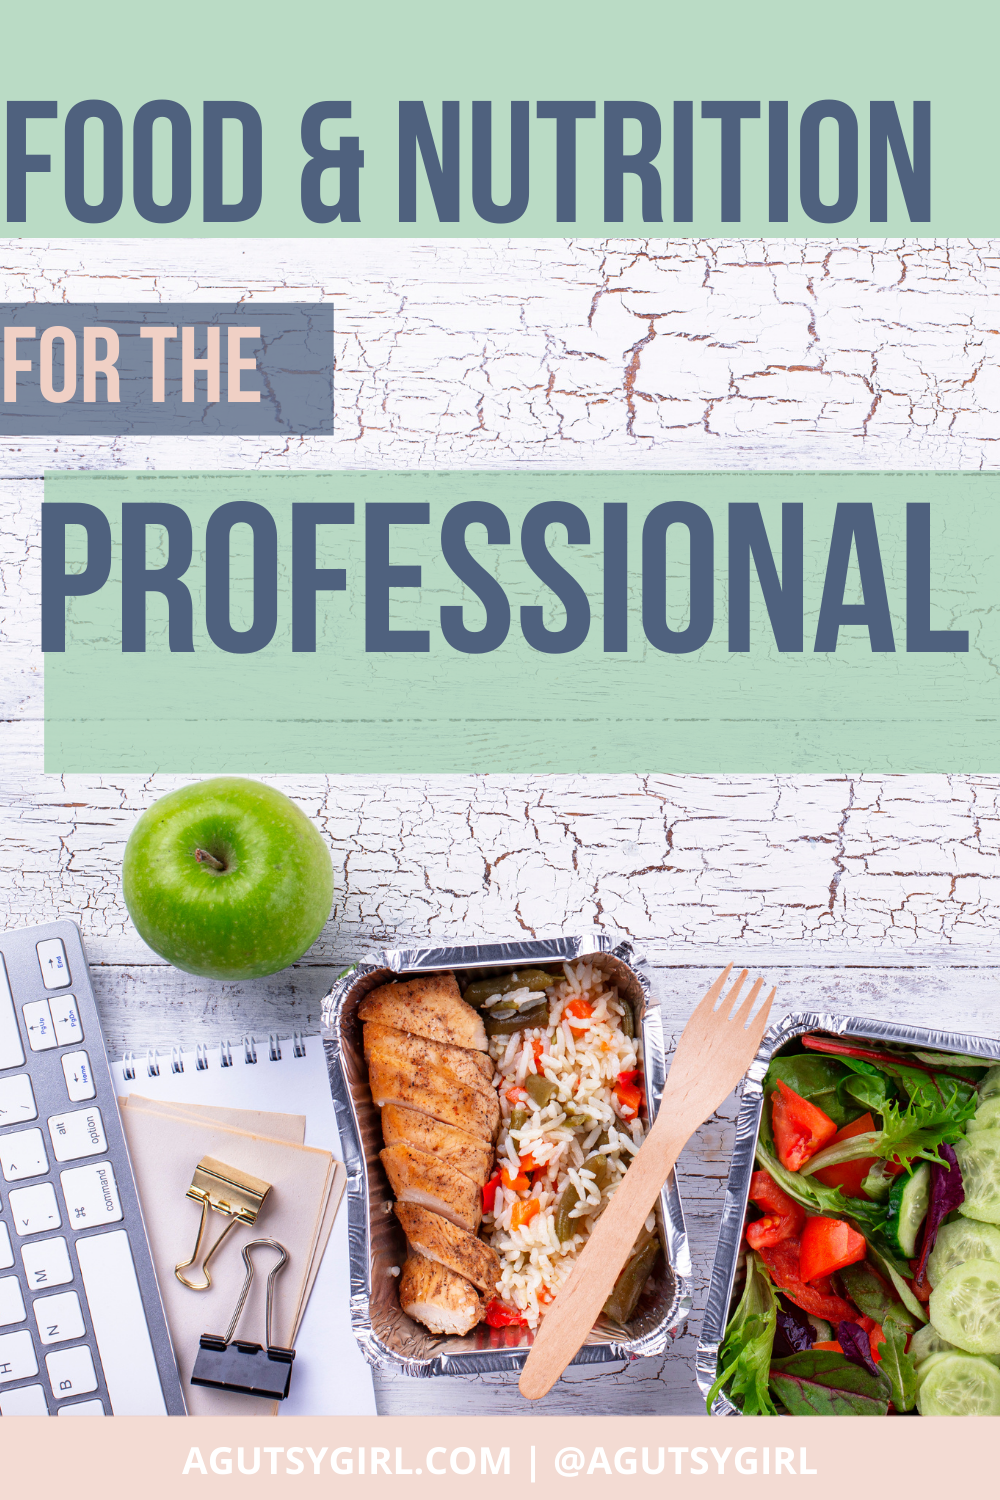 Food and Nutrition for the Professional agutsygirl.com #healthyeats #professional